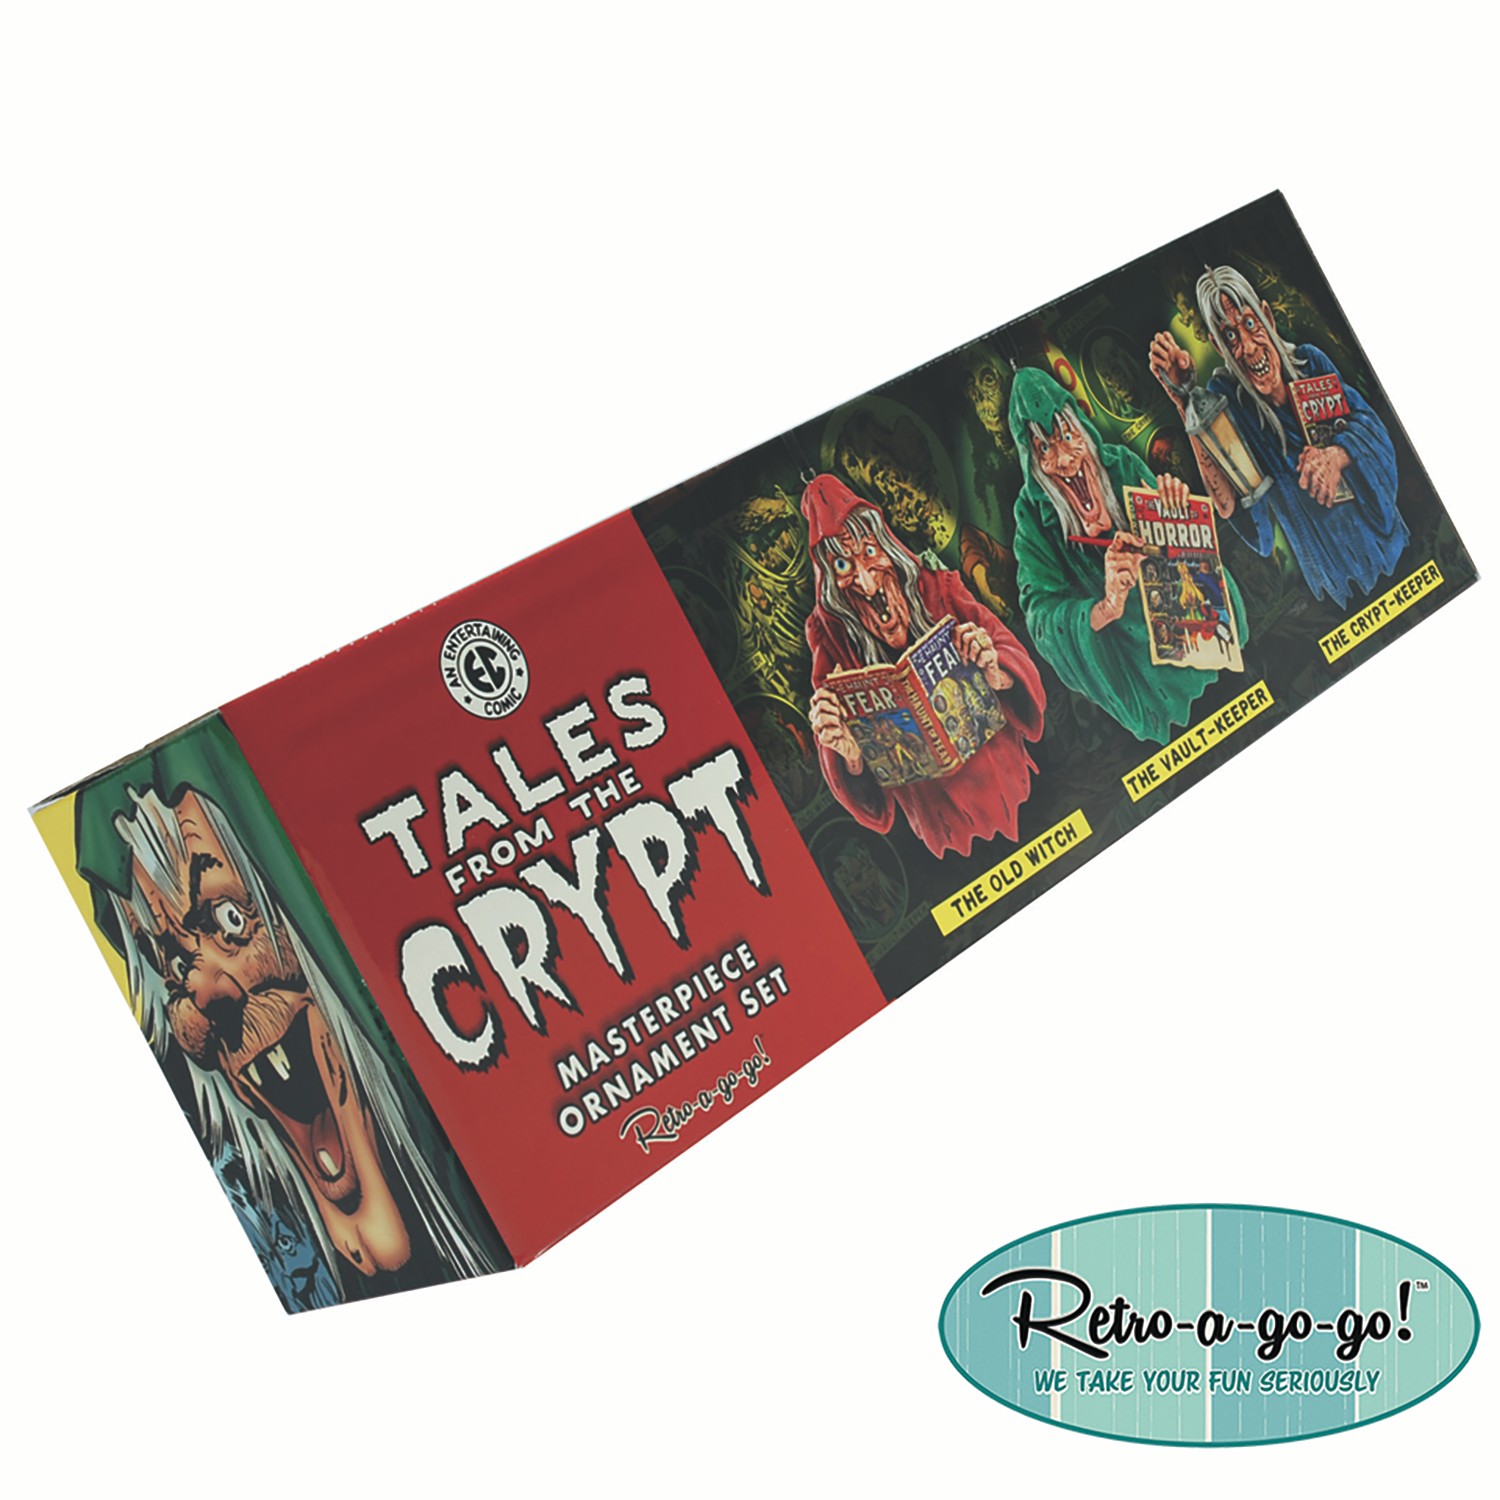 Tales from the Crypt Ornament (Prototype Shown) View 6